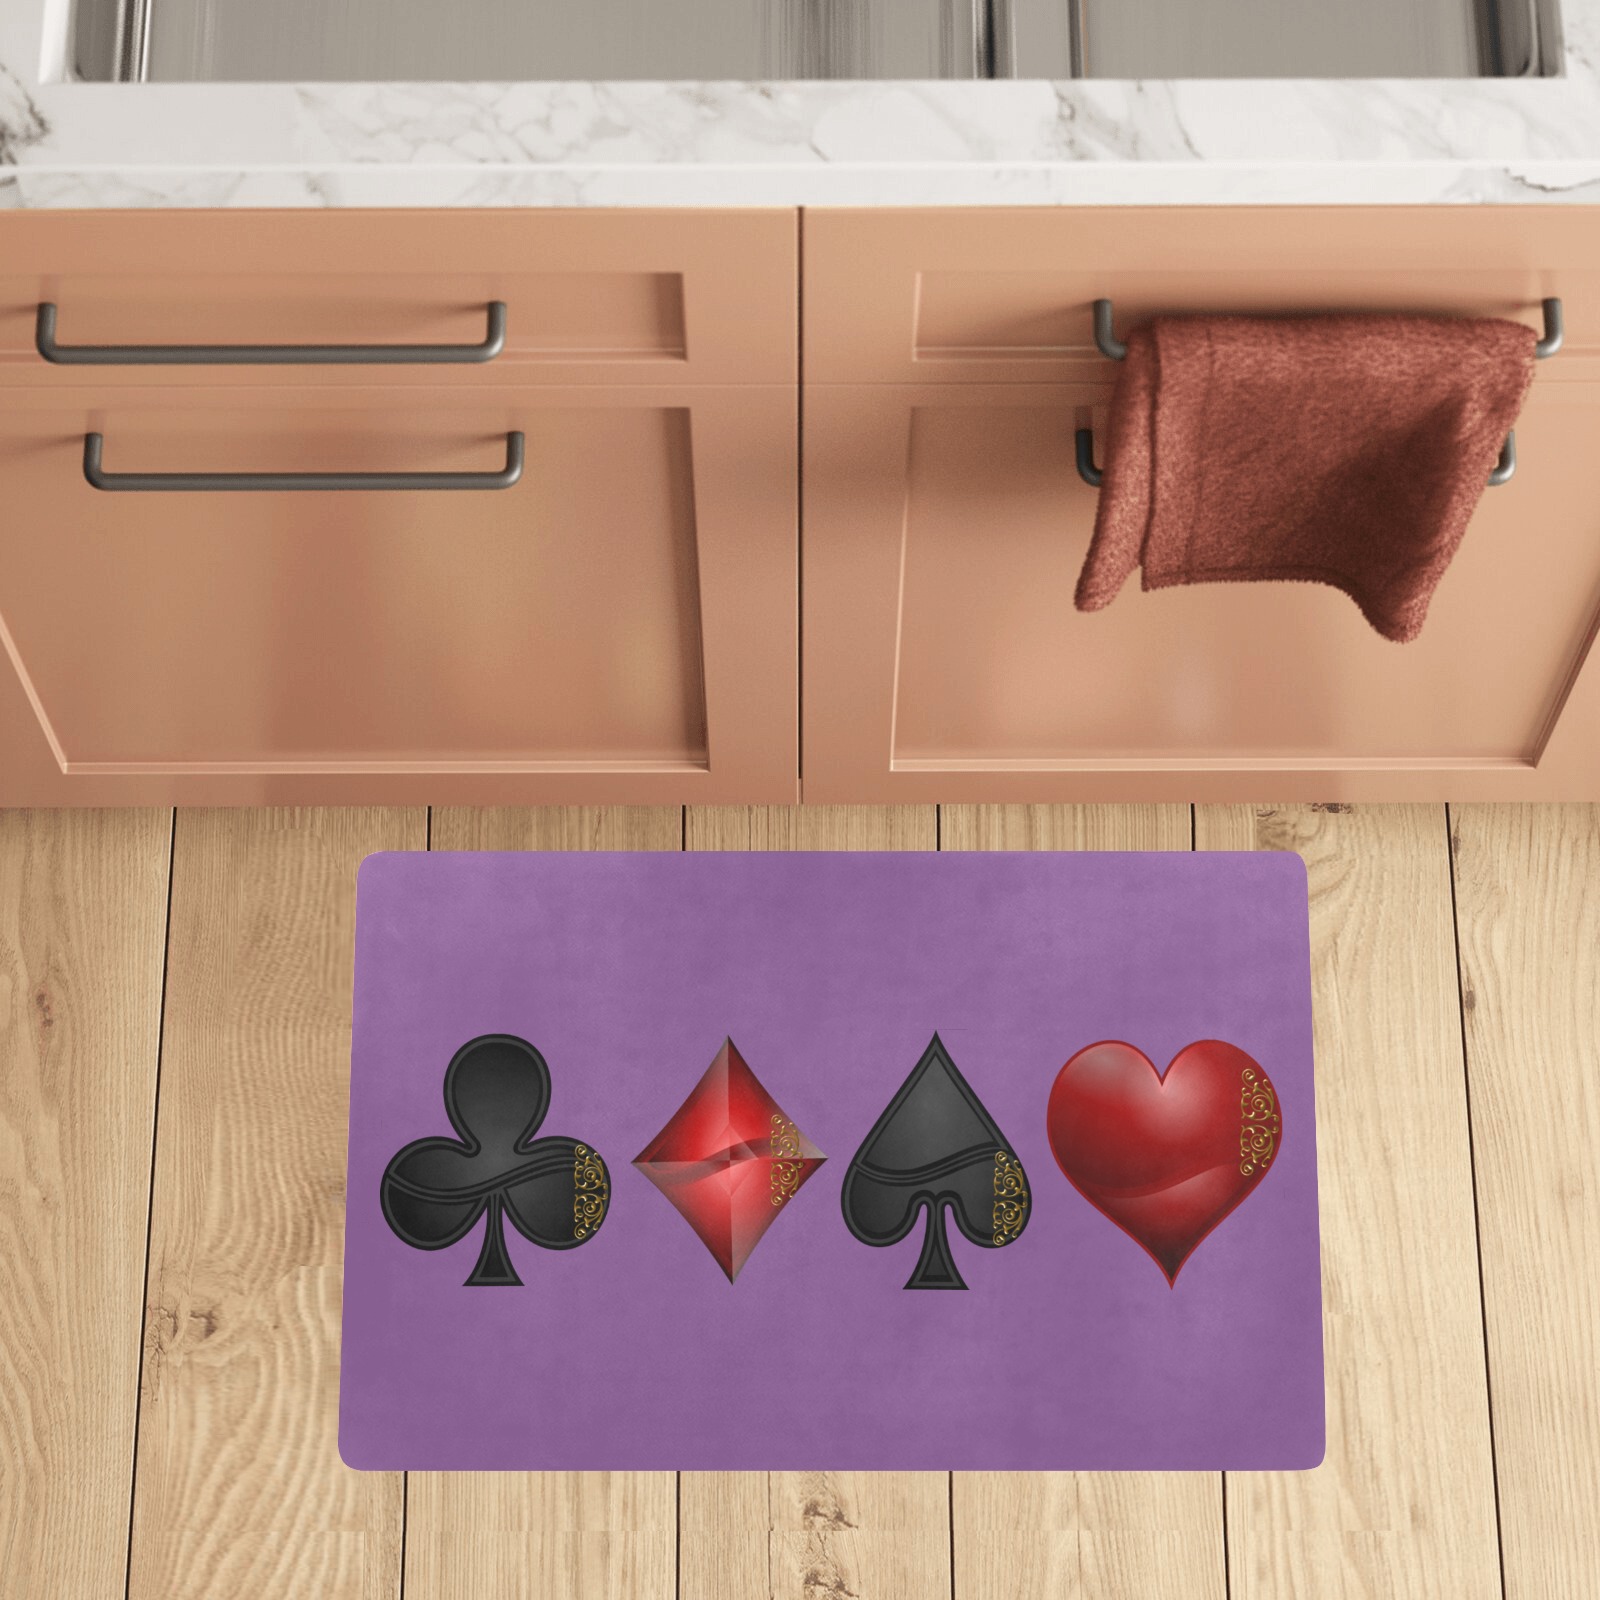 Black Red Playing Card Shapes / Purple Kitchen Mat 28"x17"